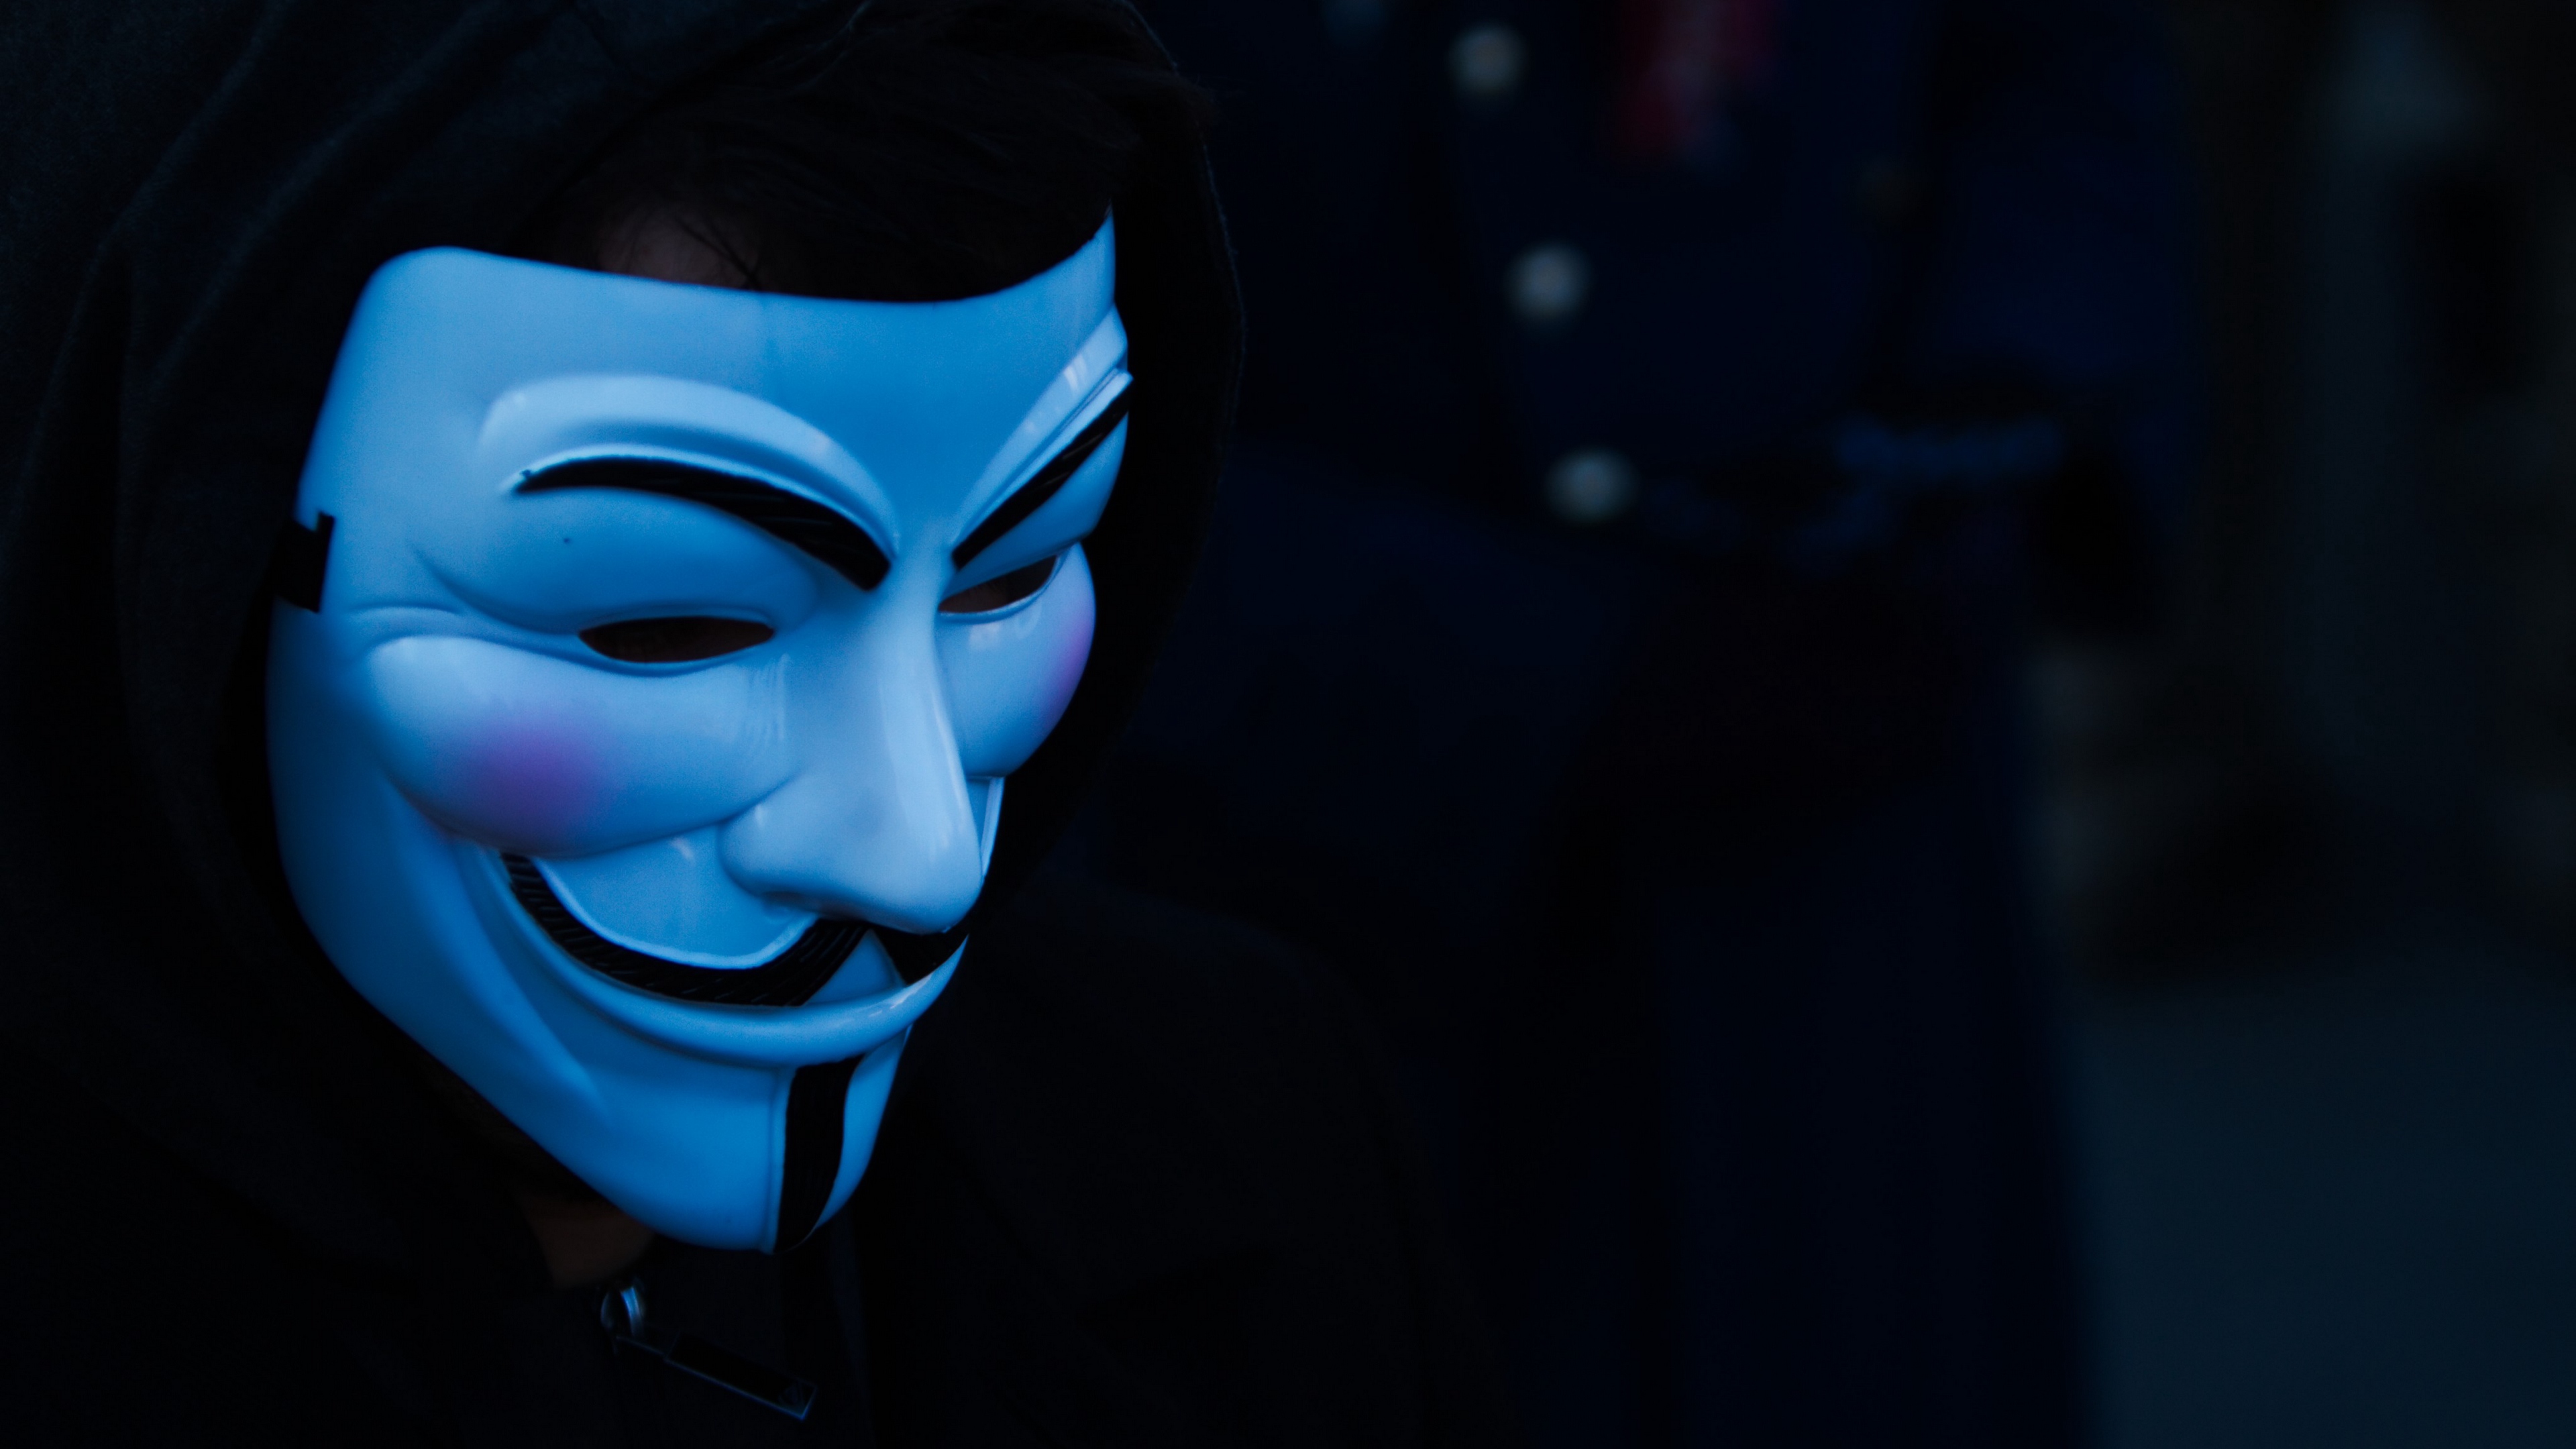 Download wallpaper 3840x2160 mask, hood, anonymous, face 4k uhd 16:9